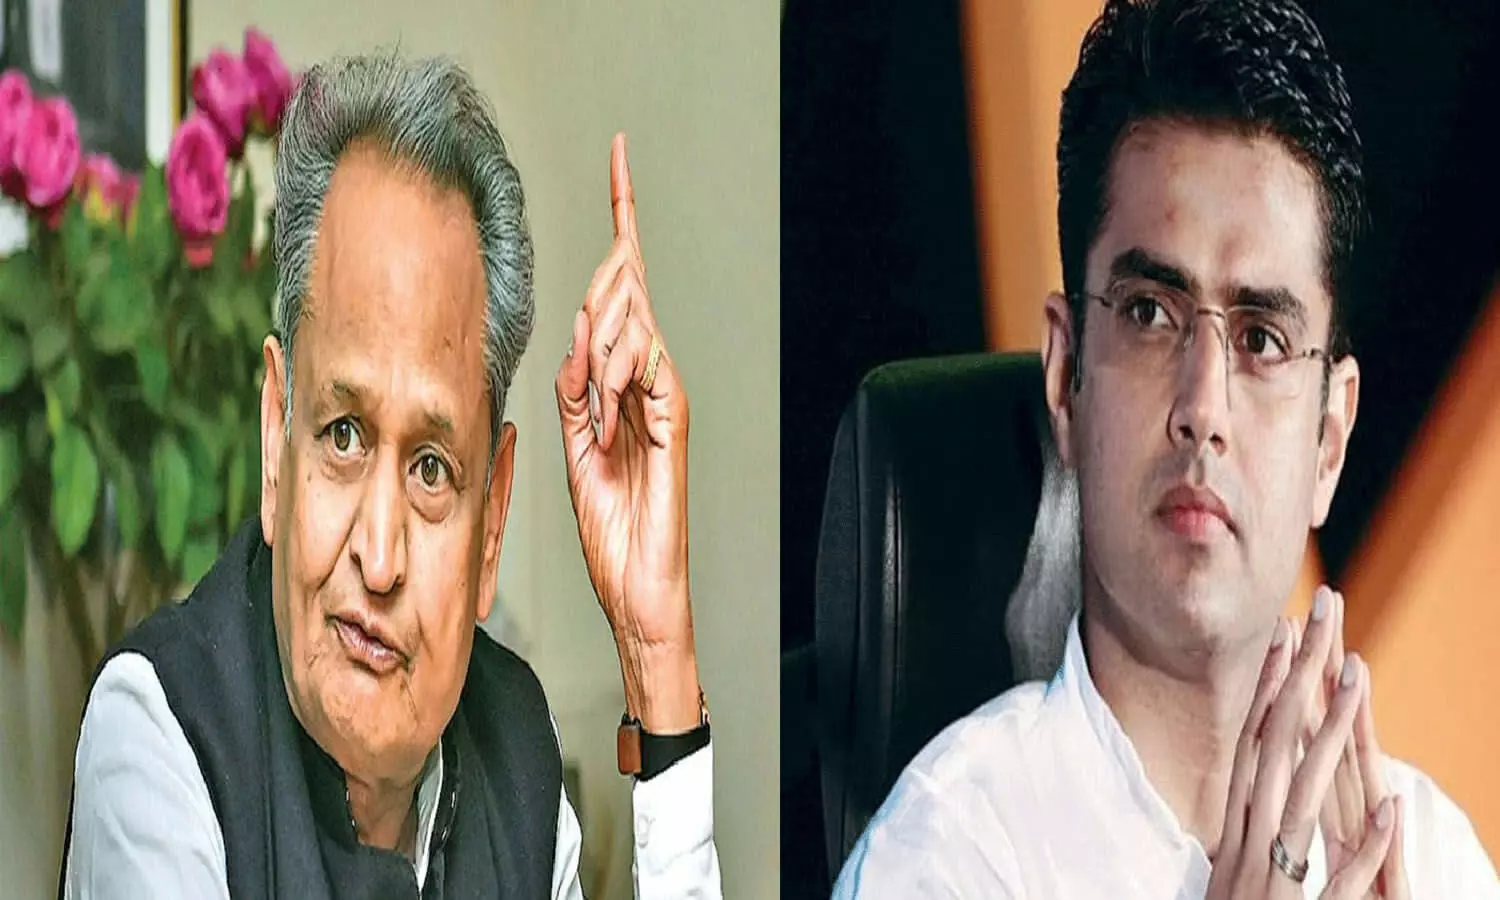 In Rajasthan, the political riot between Sachin Pilot and Chief Minister Ashok Gehlot is gaining momentum.